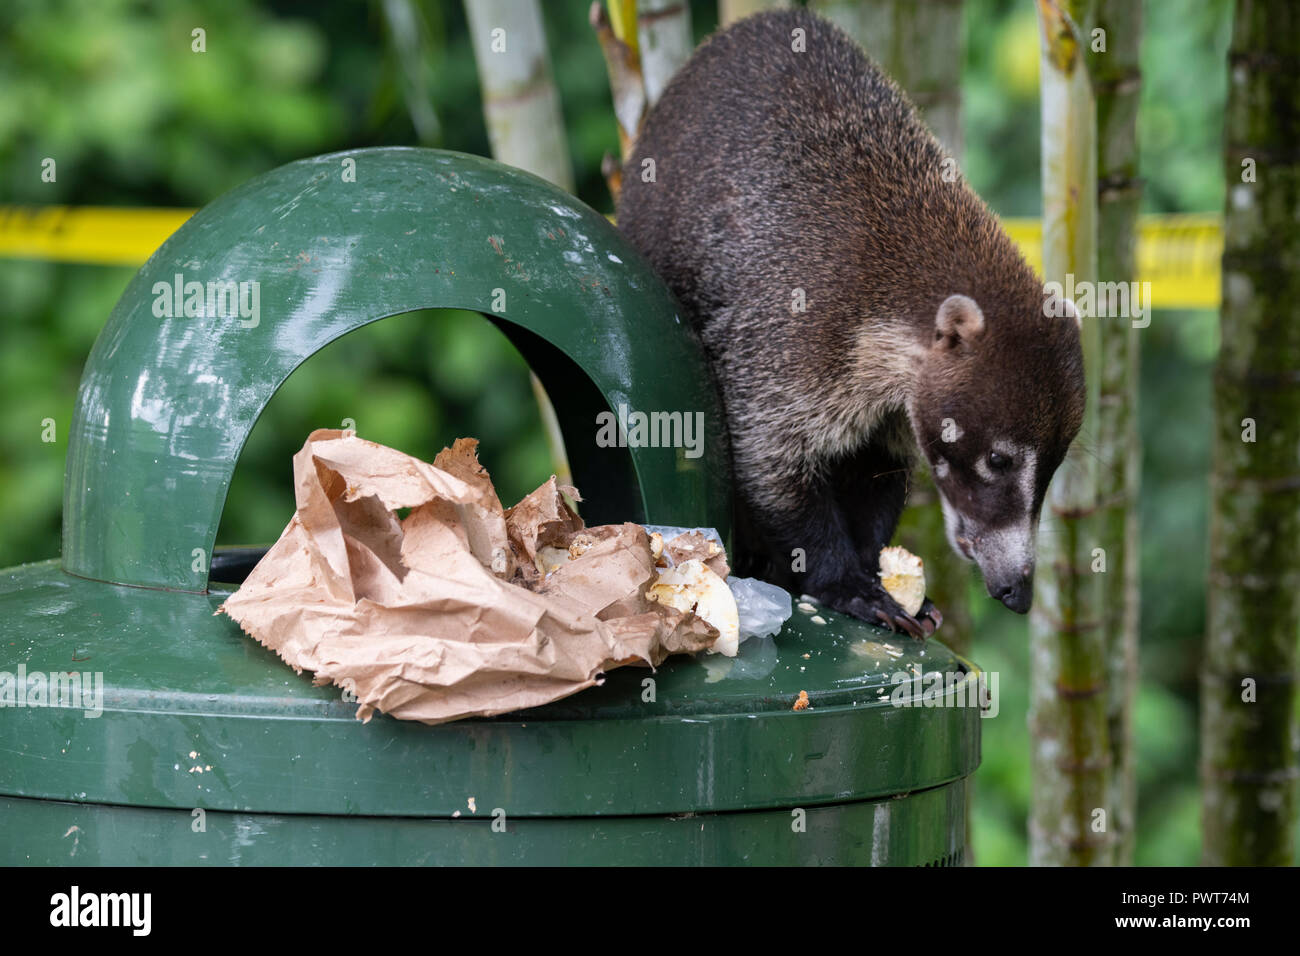 Central America, Panama. South American coati, a member of the raccoon family. Coati in a trash can. Stock Photo